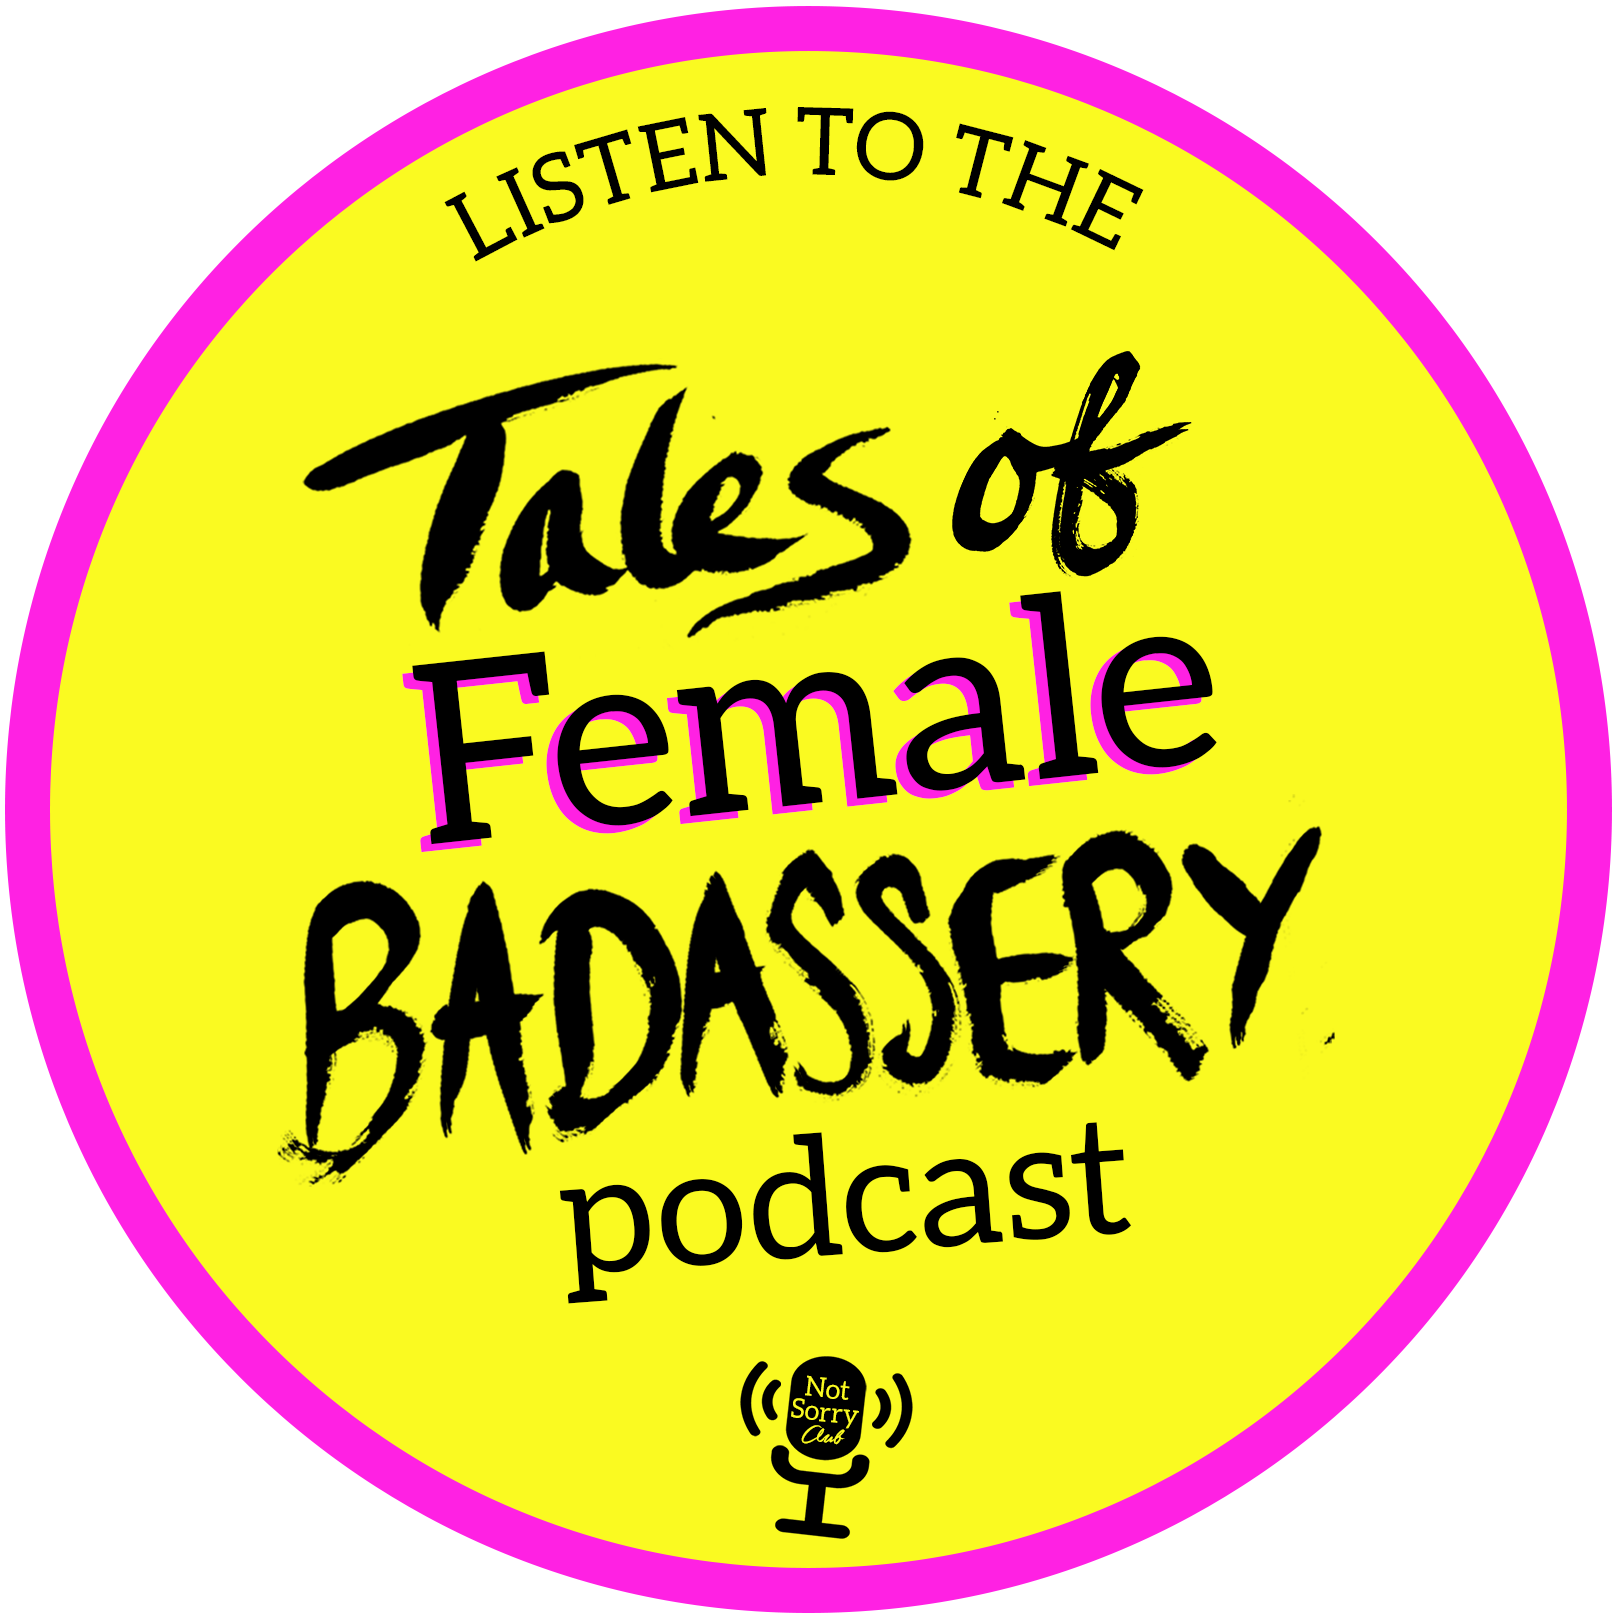 STICKER Listen To The Tales of Female Badassery Not Sorry Club copyright 2022 Betty Adamou